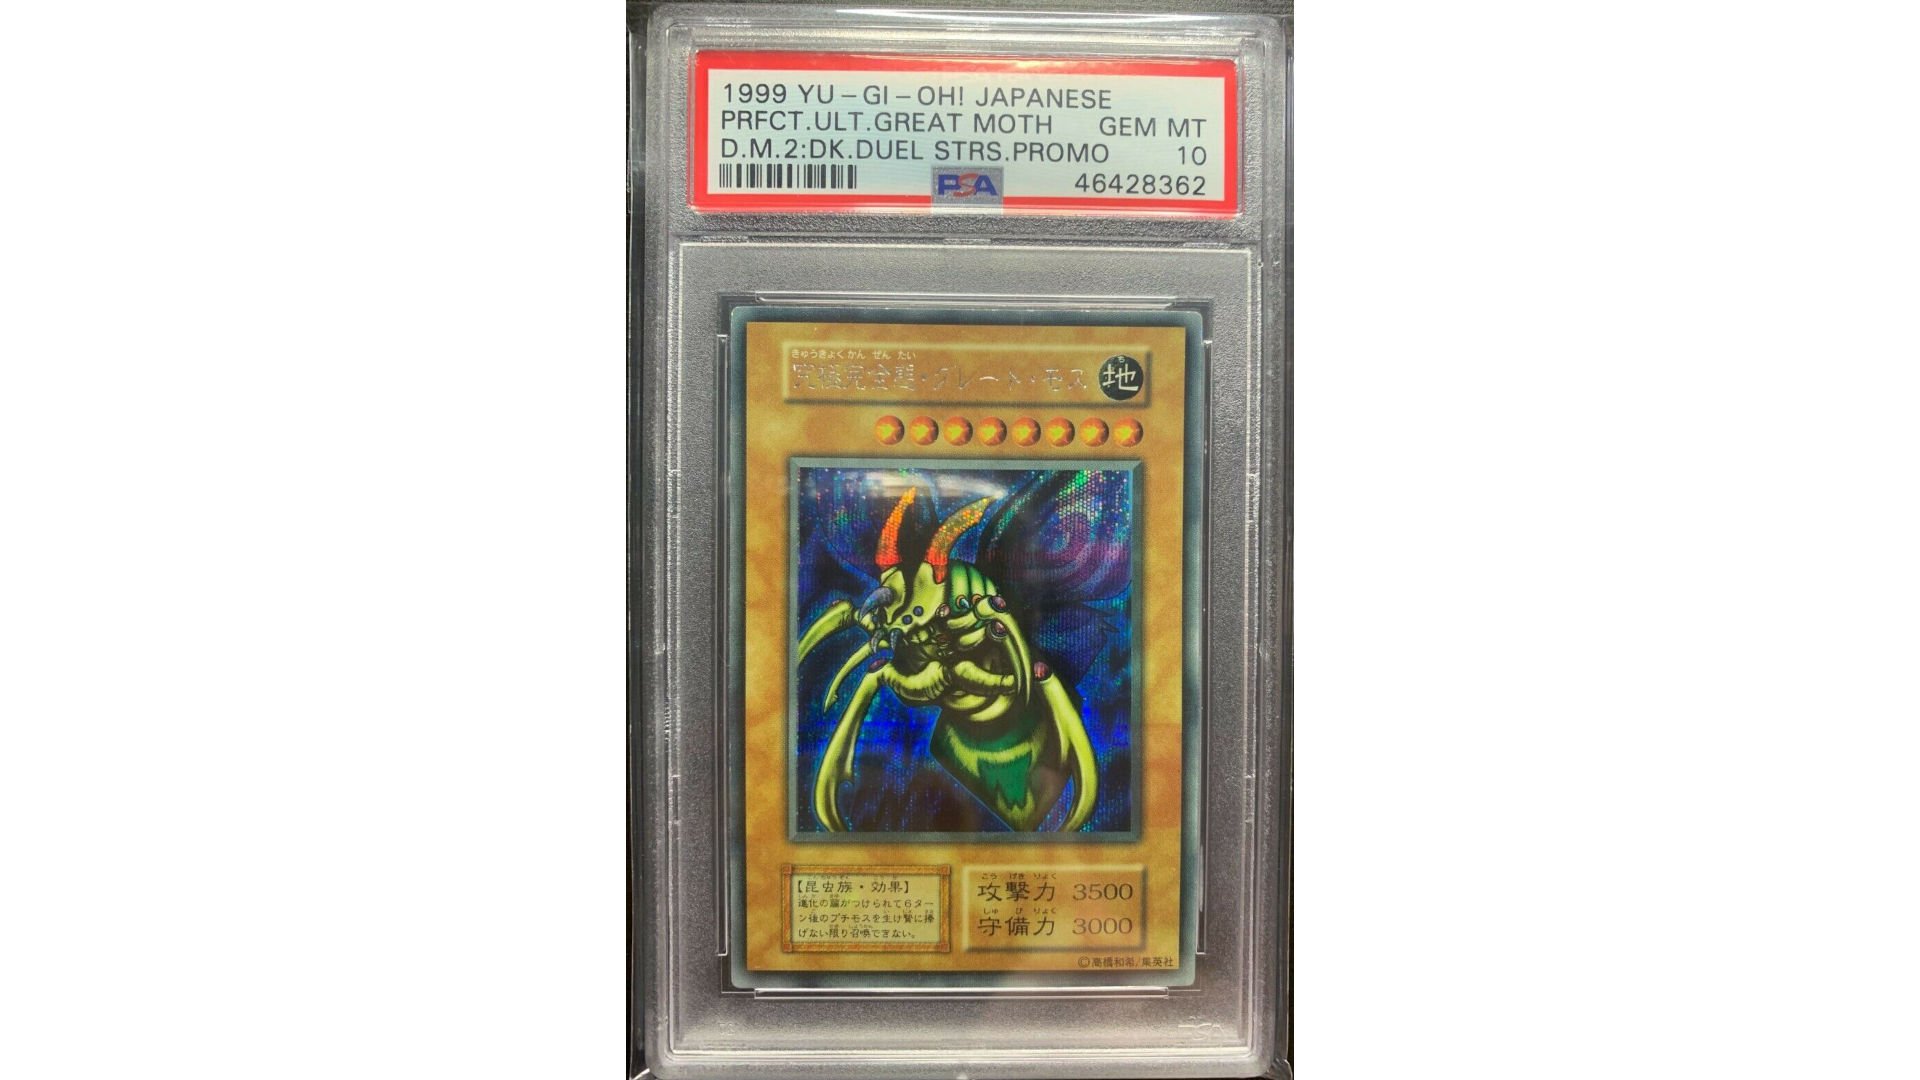 Most expensive Yugioh cards - photo of a Perfectly Ultimate Great Moth, a rare YuGiOh card